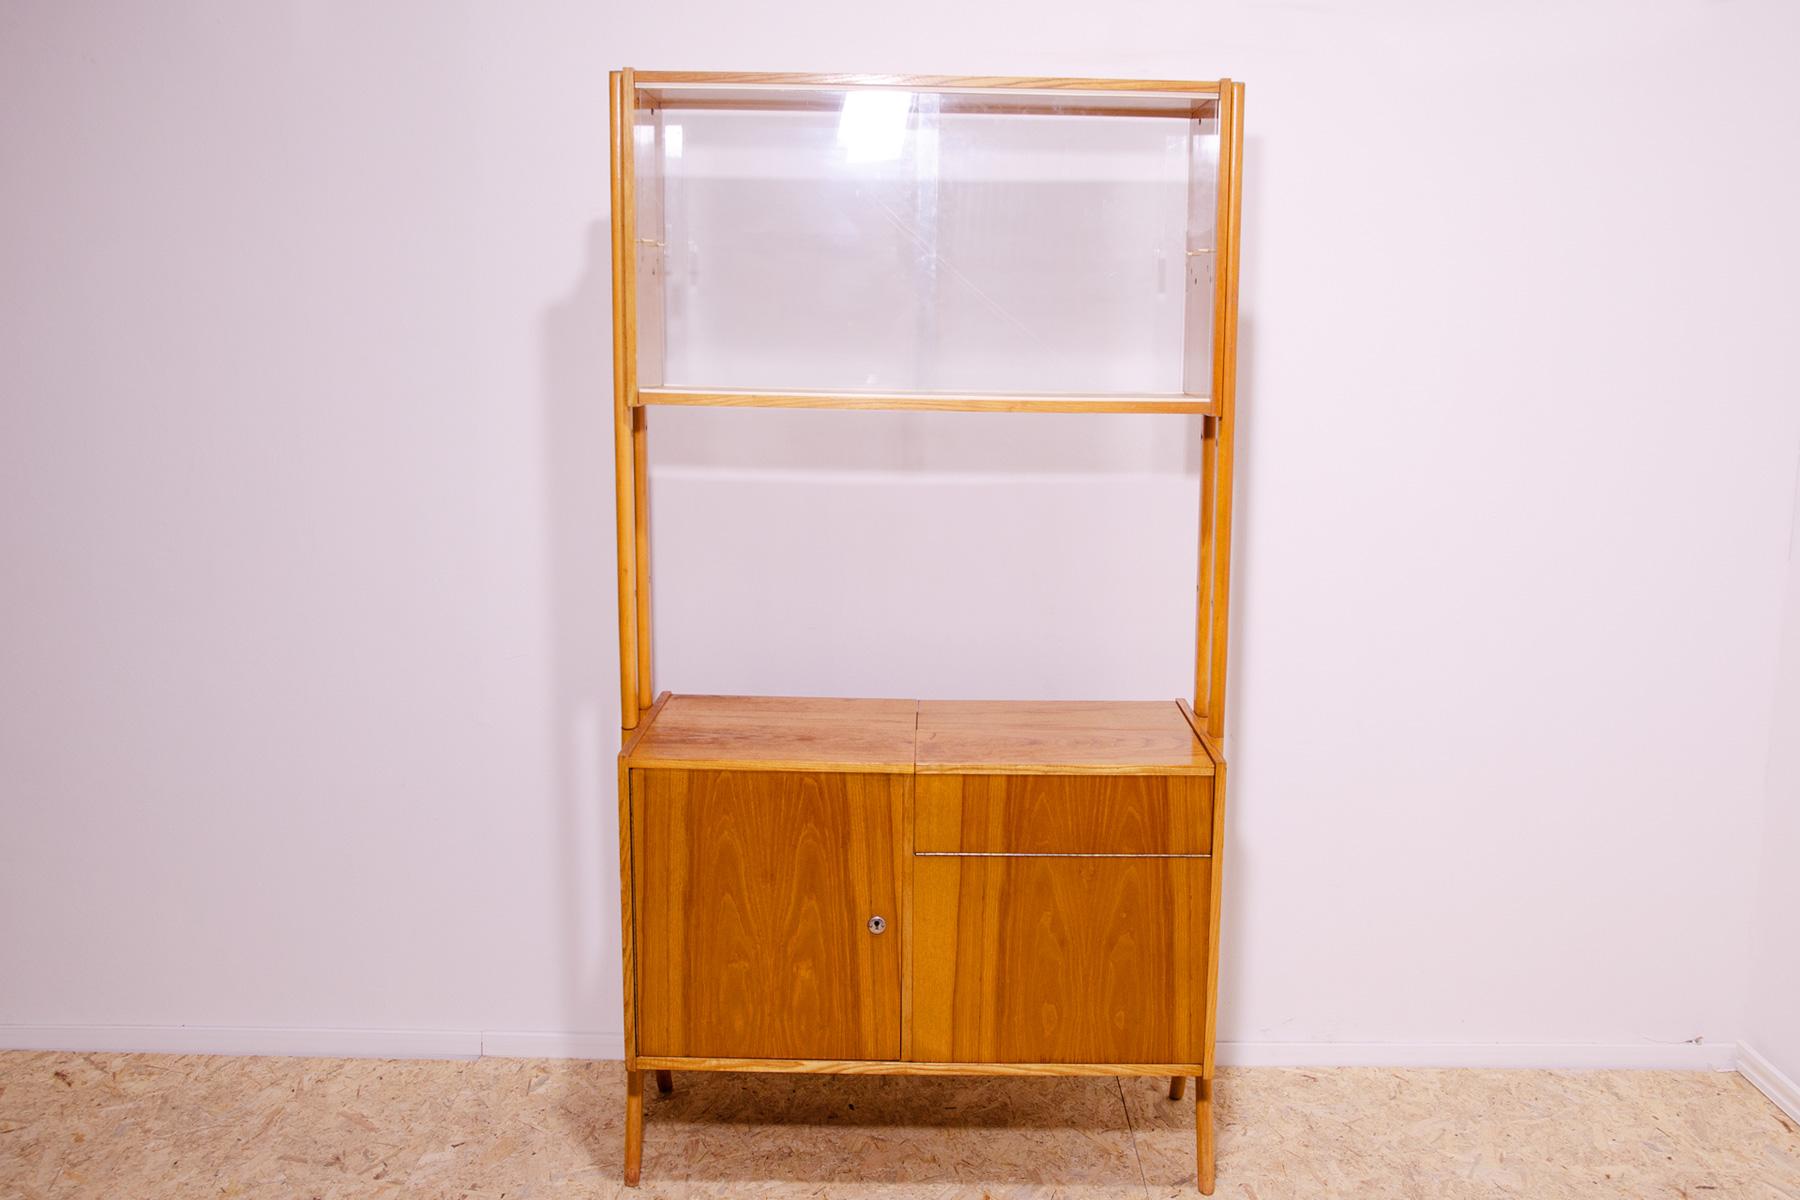 Mid century Vintage bookcase from the 1960´s. It was designed by František Jirák for Tatra nábytok in the former Czechoslovakia. Features a simple design, a glazed section with a storage space and pull-out section usable as a bar.

In very good